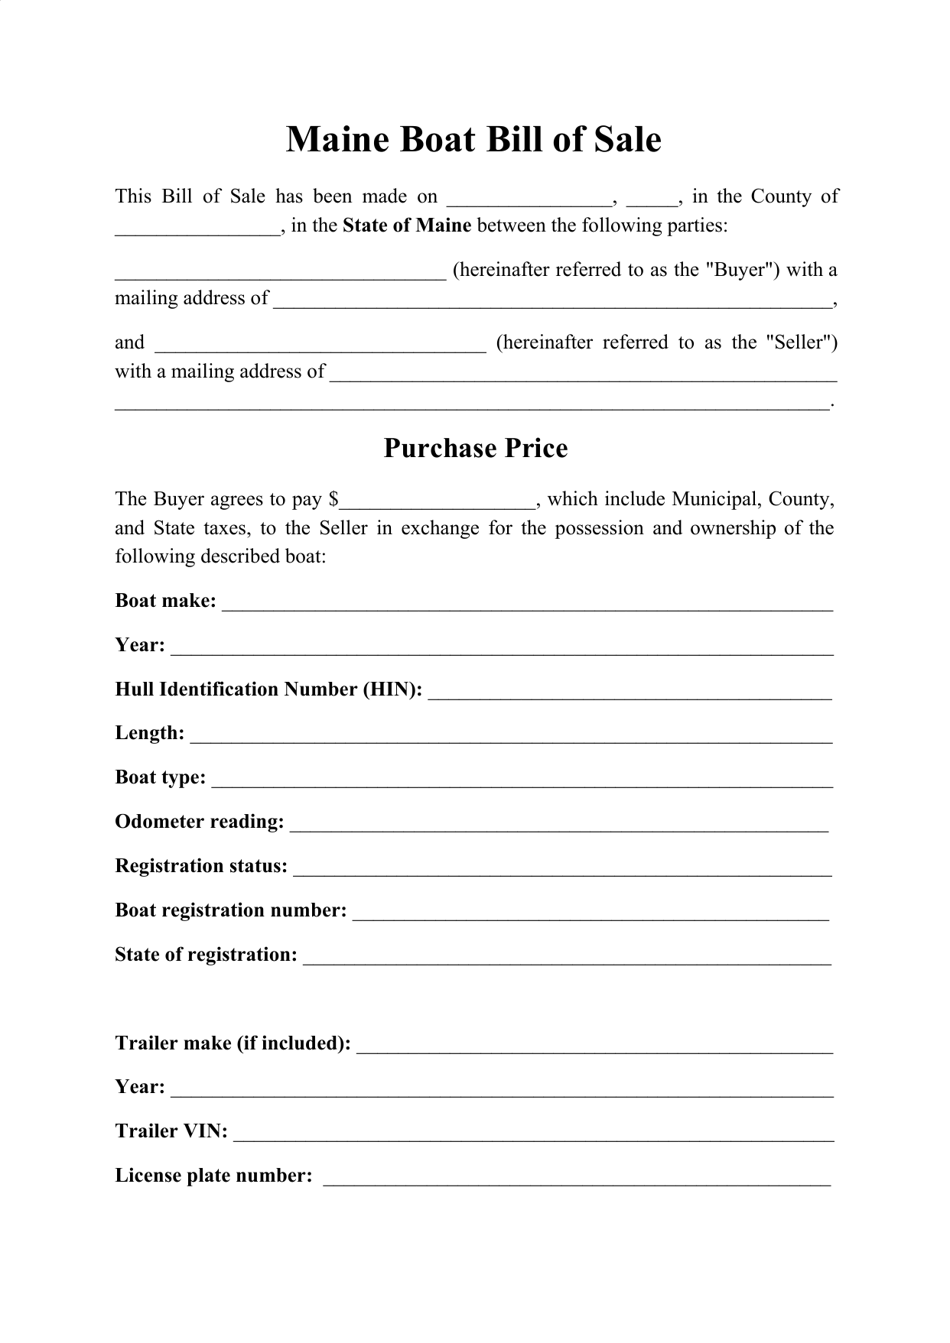 Boat Bill of Sale Form - Maine, Page 1